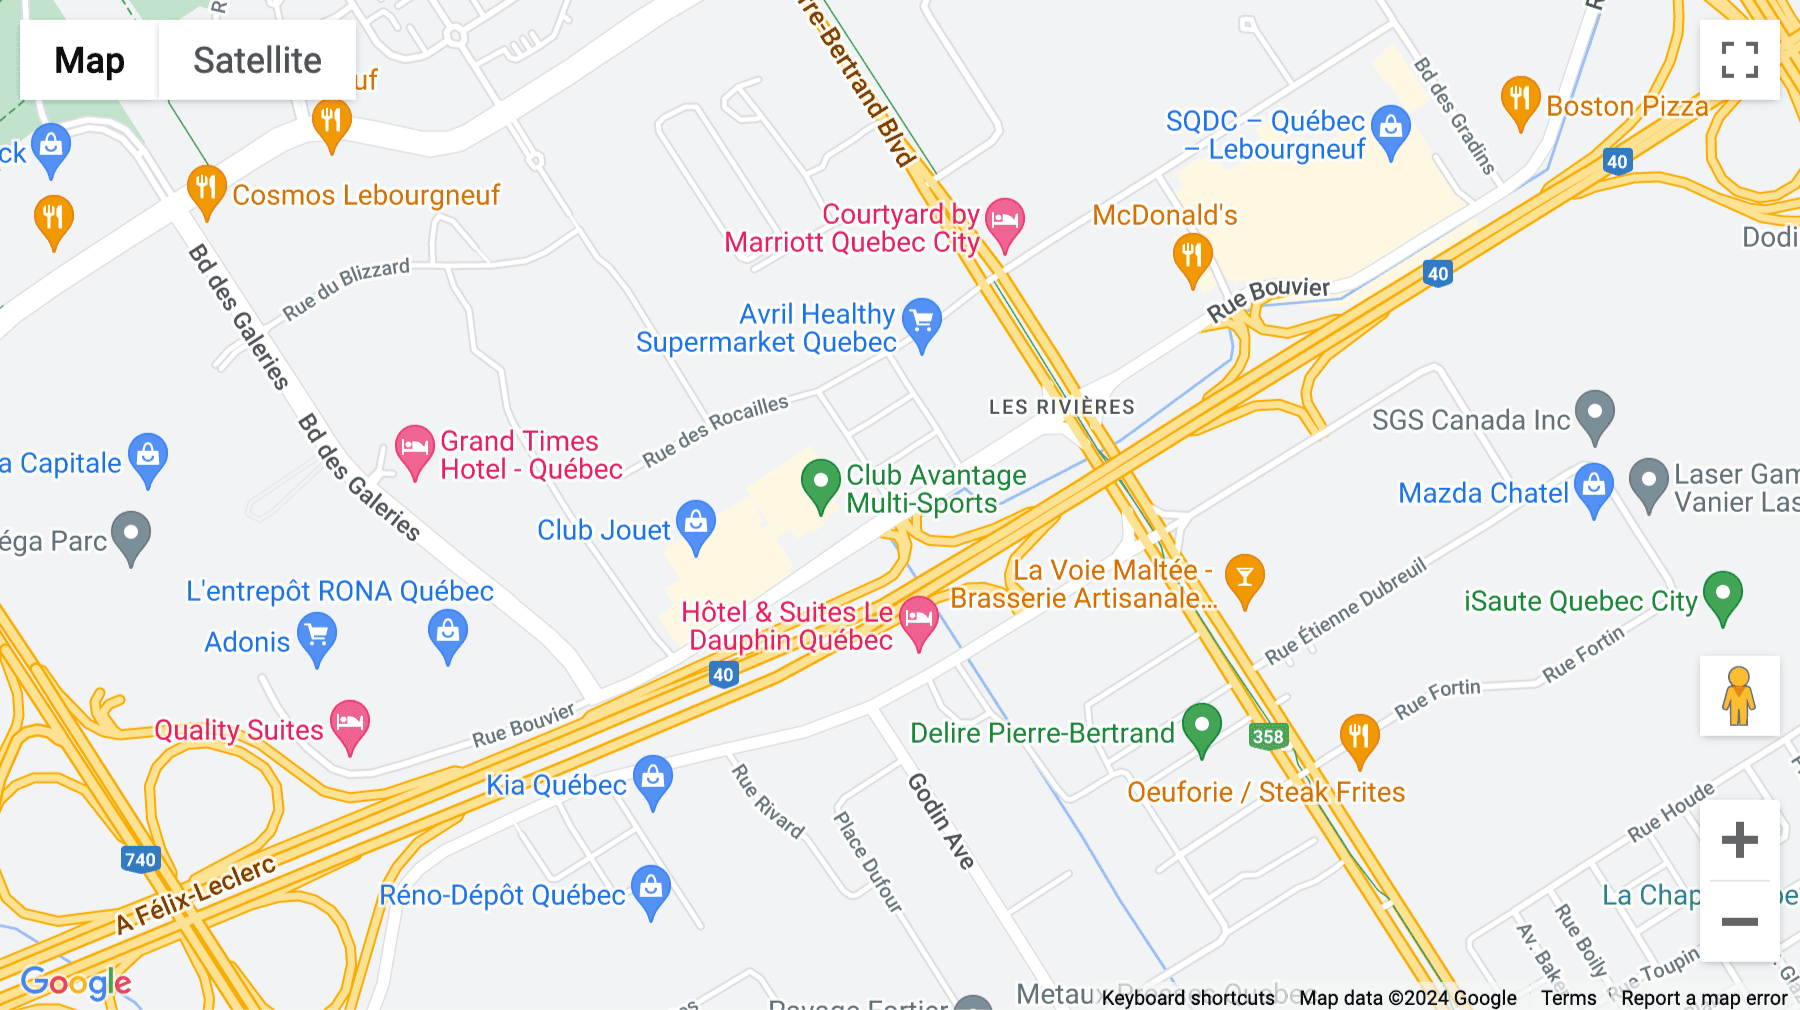 Click for interative map of 1020 Bouvier Street, Suite 400, Lebourgneuf Business Centre, Quebec City